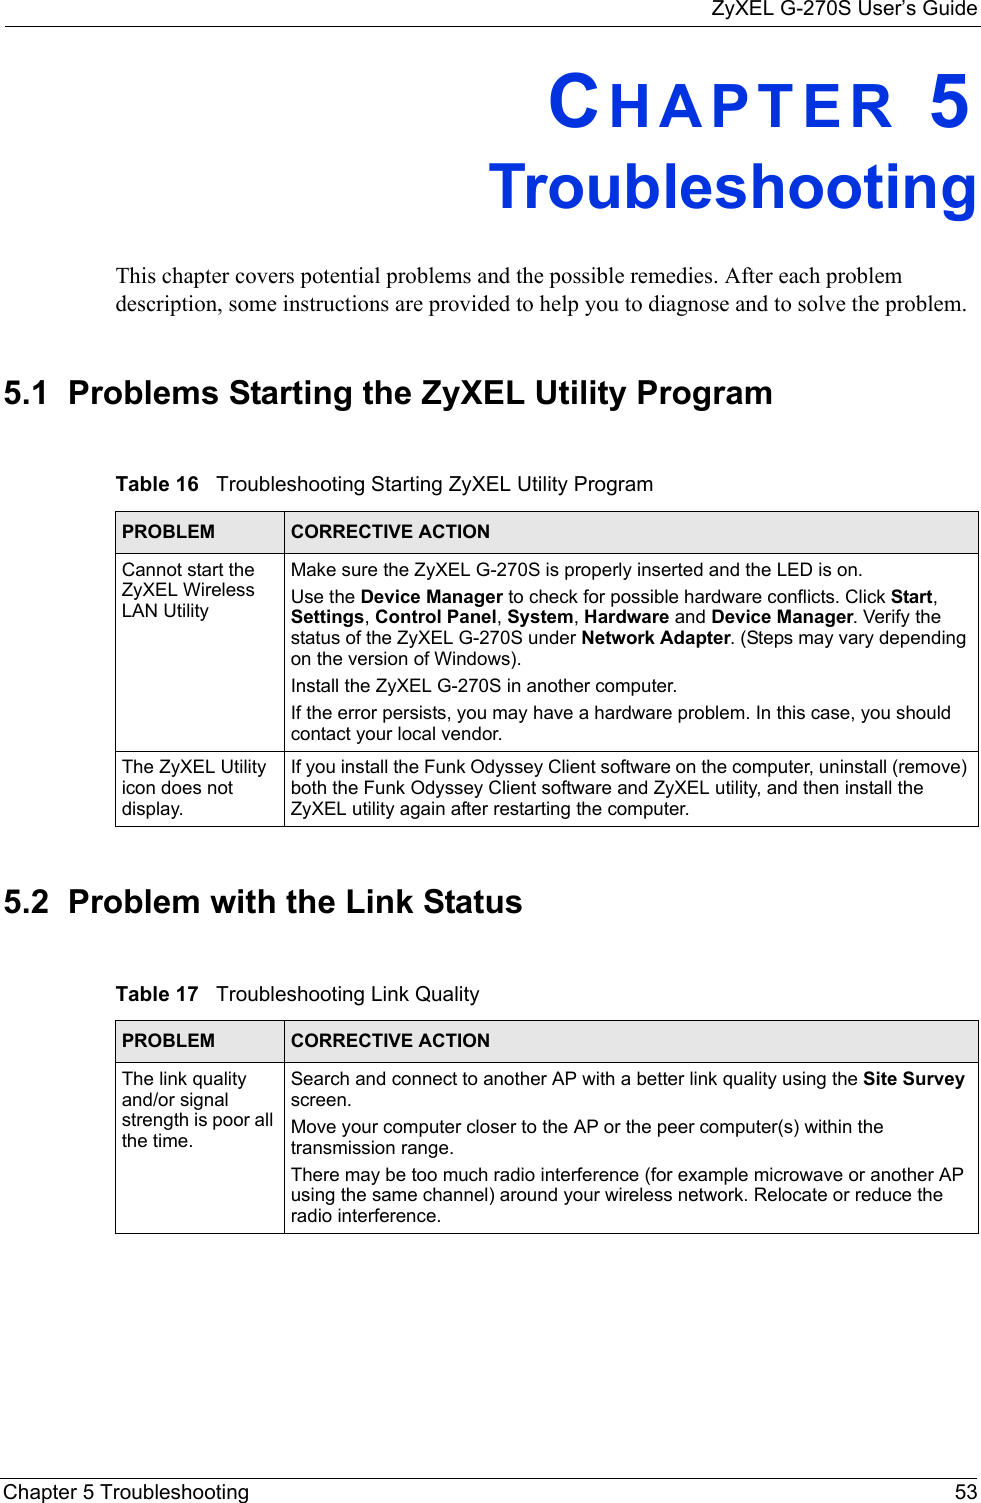 ZyXEL G-270S User’s GuideChapter 5 Troubleshooting 53CHAPTER 5   TroubleshootingThis chapter covers potential problems and the possible remedies. After each problem description, some instructions are provided to help you to diagnose and to solve the problem.5.1  Problems Starting the ZyXEL Utility Program5.2  Problem with the Link StatusTable 16   Troubleshooting Starting ZyXEL Utility Program PROBLEM CORRECTIVE ACTIONCannot start the ZyXEL Wireless LAN UtilityMake sure the ZyXEL G-270S is properly inserted and the LED is on. Use the Device Manager to check for possible hardware conflicts. Click Start, Settings, Control Panel, System, Hardware and Device Manager. Verify the status of the ZyXEL G-270S under Network Adapter. (Steps may vary depending on the version of Windows). Install the ZyXEL G-270S in another computer.If the error persists, you may have a hardware problem. In this case, you should contact your local vendor.The ZyXEL Utility icon does not display.If you install the Funk Odyssey Client software on the computer, uninstall (remove) both the Funk Odyssey Client software and ZyXEL utility, and then install the ZyXEL utility again after restarting the computer.Table 17   Troubleshooting Link Quality PROBLEM CORRECTIVE ACTIONThe link quality and/or signal strength is poor all the time.Search and connect to another AP with a better link quality using the Site Survey screen.Move your computer closer to the AP or the peer computer(s) within the transmission range.There may be too much radio interference (for example microwave or another AP using the same channel) around your wireless network. Relocate or reduce the radio interference.